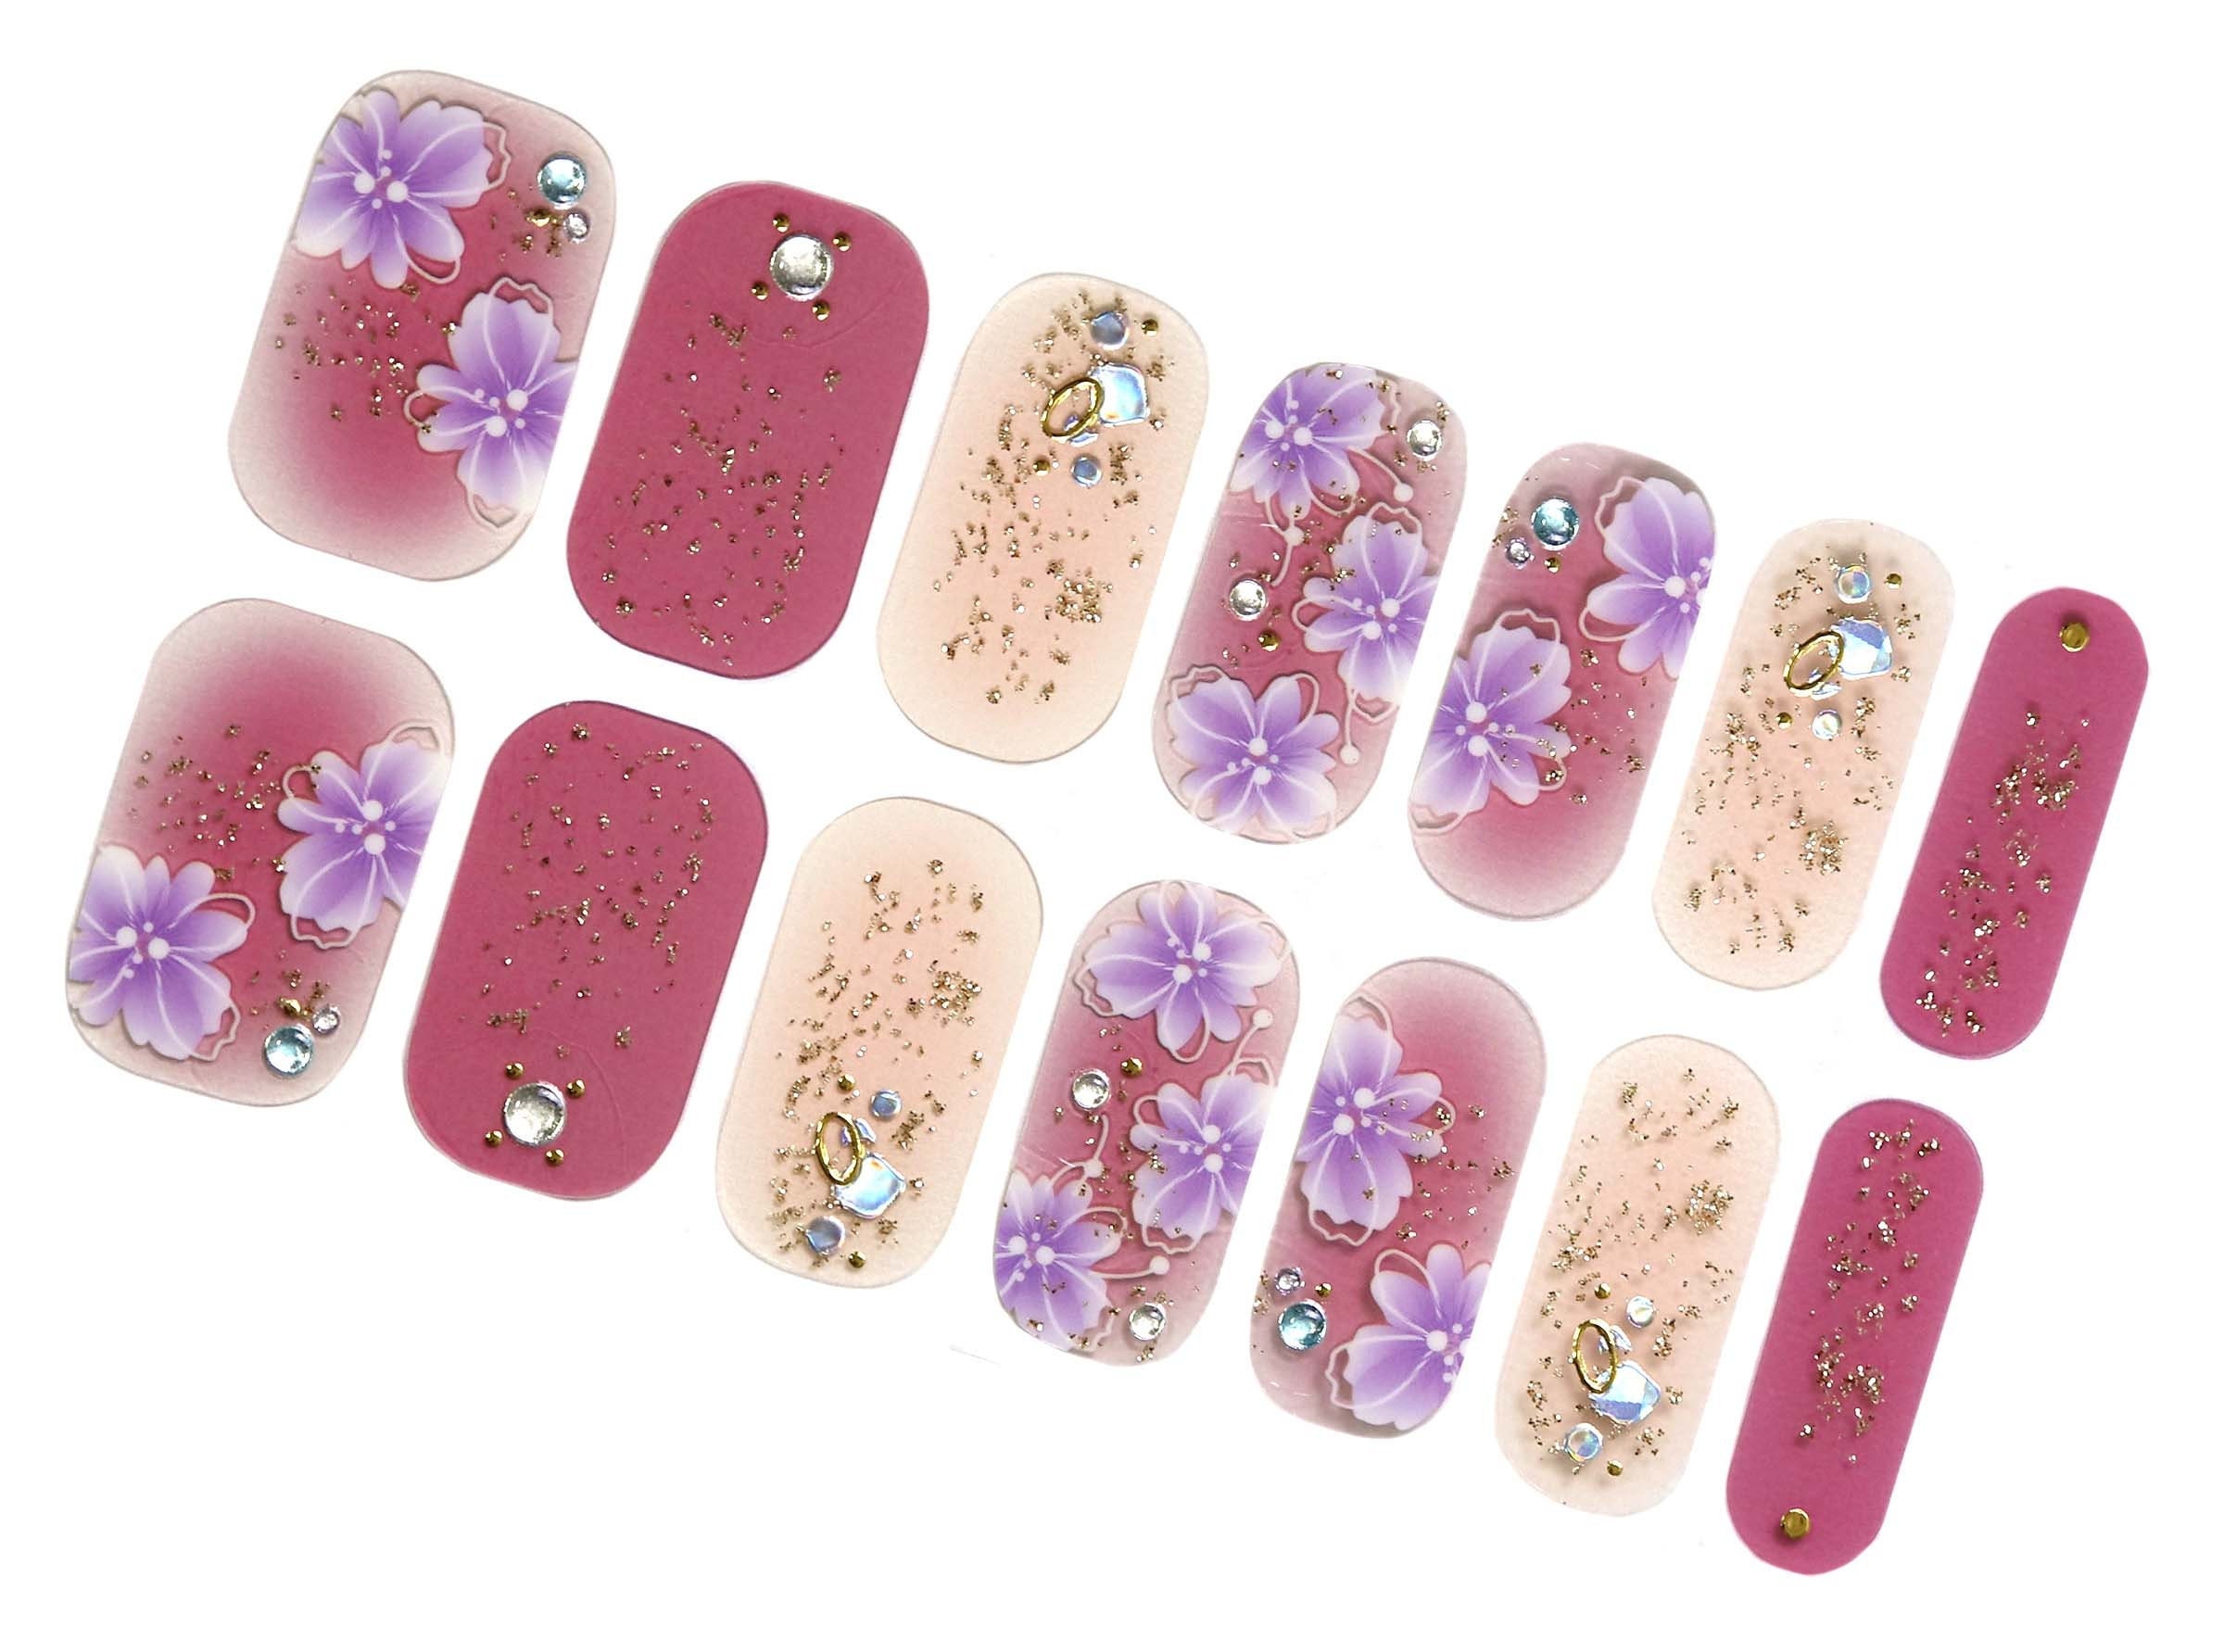 Pink Glitter French Tip Manicure Nail Polish Wraps Strips Ladies